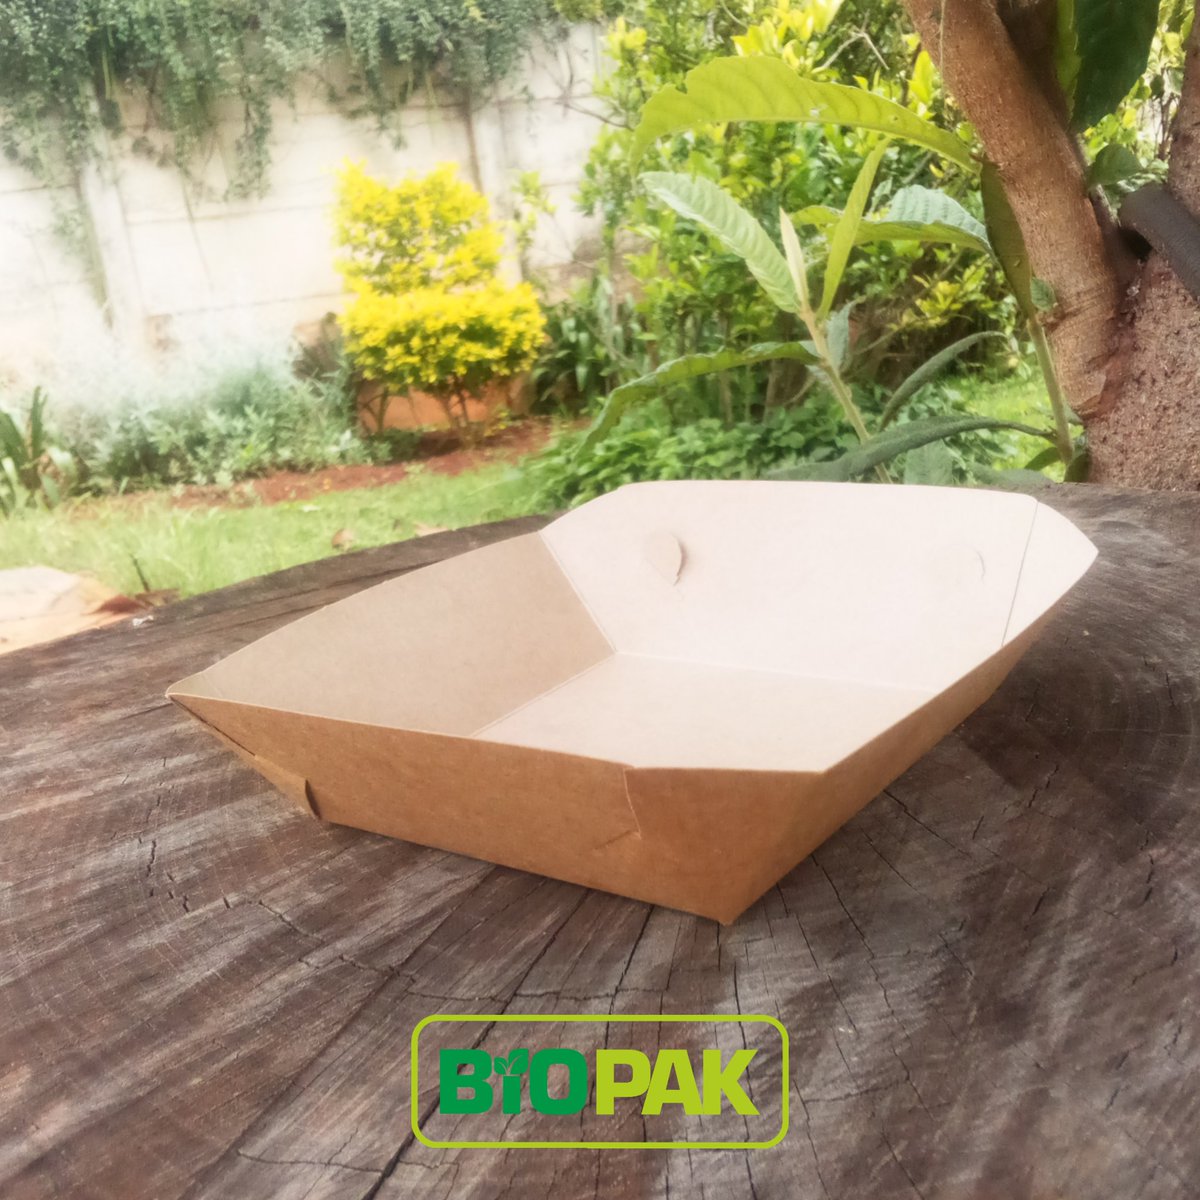 *New to the BIOPAK Kraft Range*

These Food Trays are perfect for use at Food Markets, Food Stalls, or Food Trucks to serve a wide range of foods such as cakes, samosas and meats.

They are easy to construct, oil and water resistant and BEST OF ALL 100% Biodegradable #GoingGreen